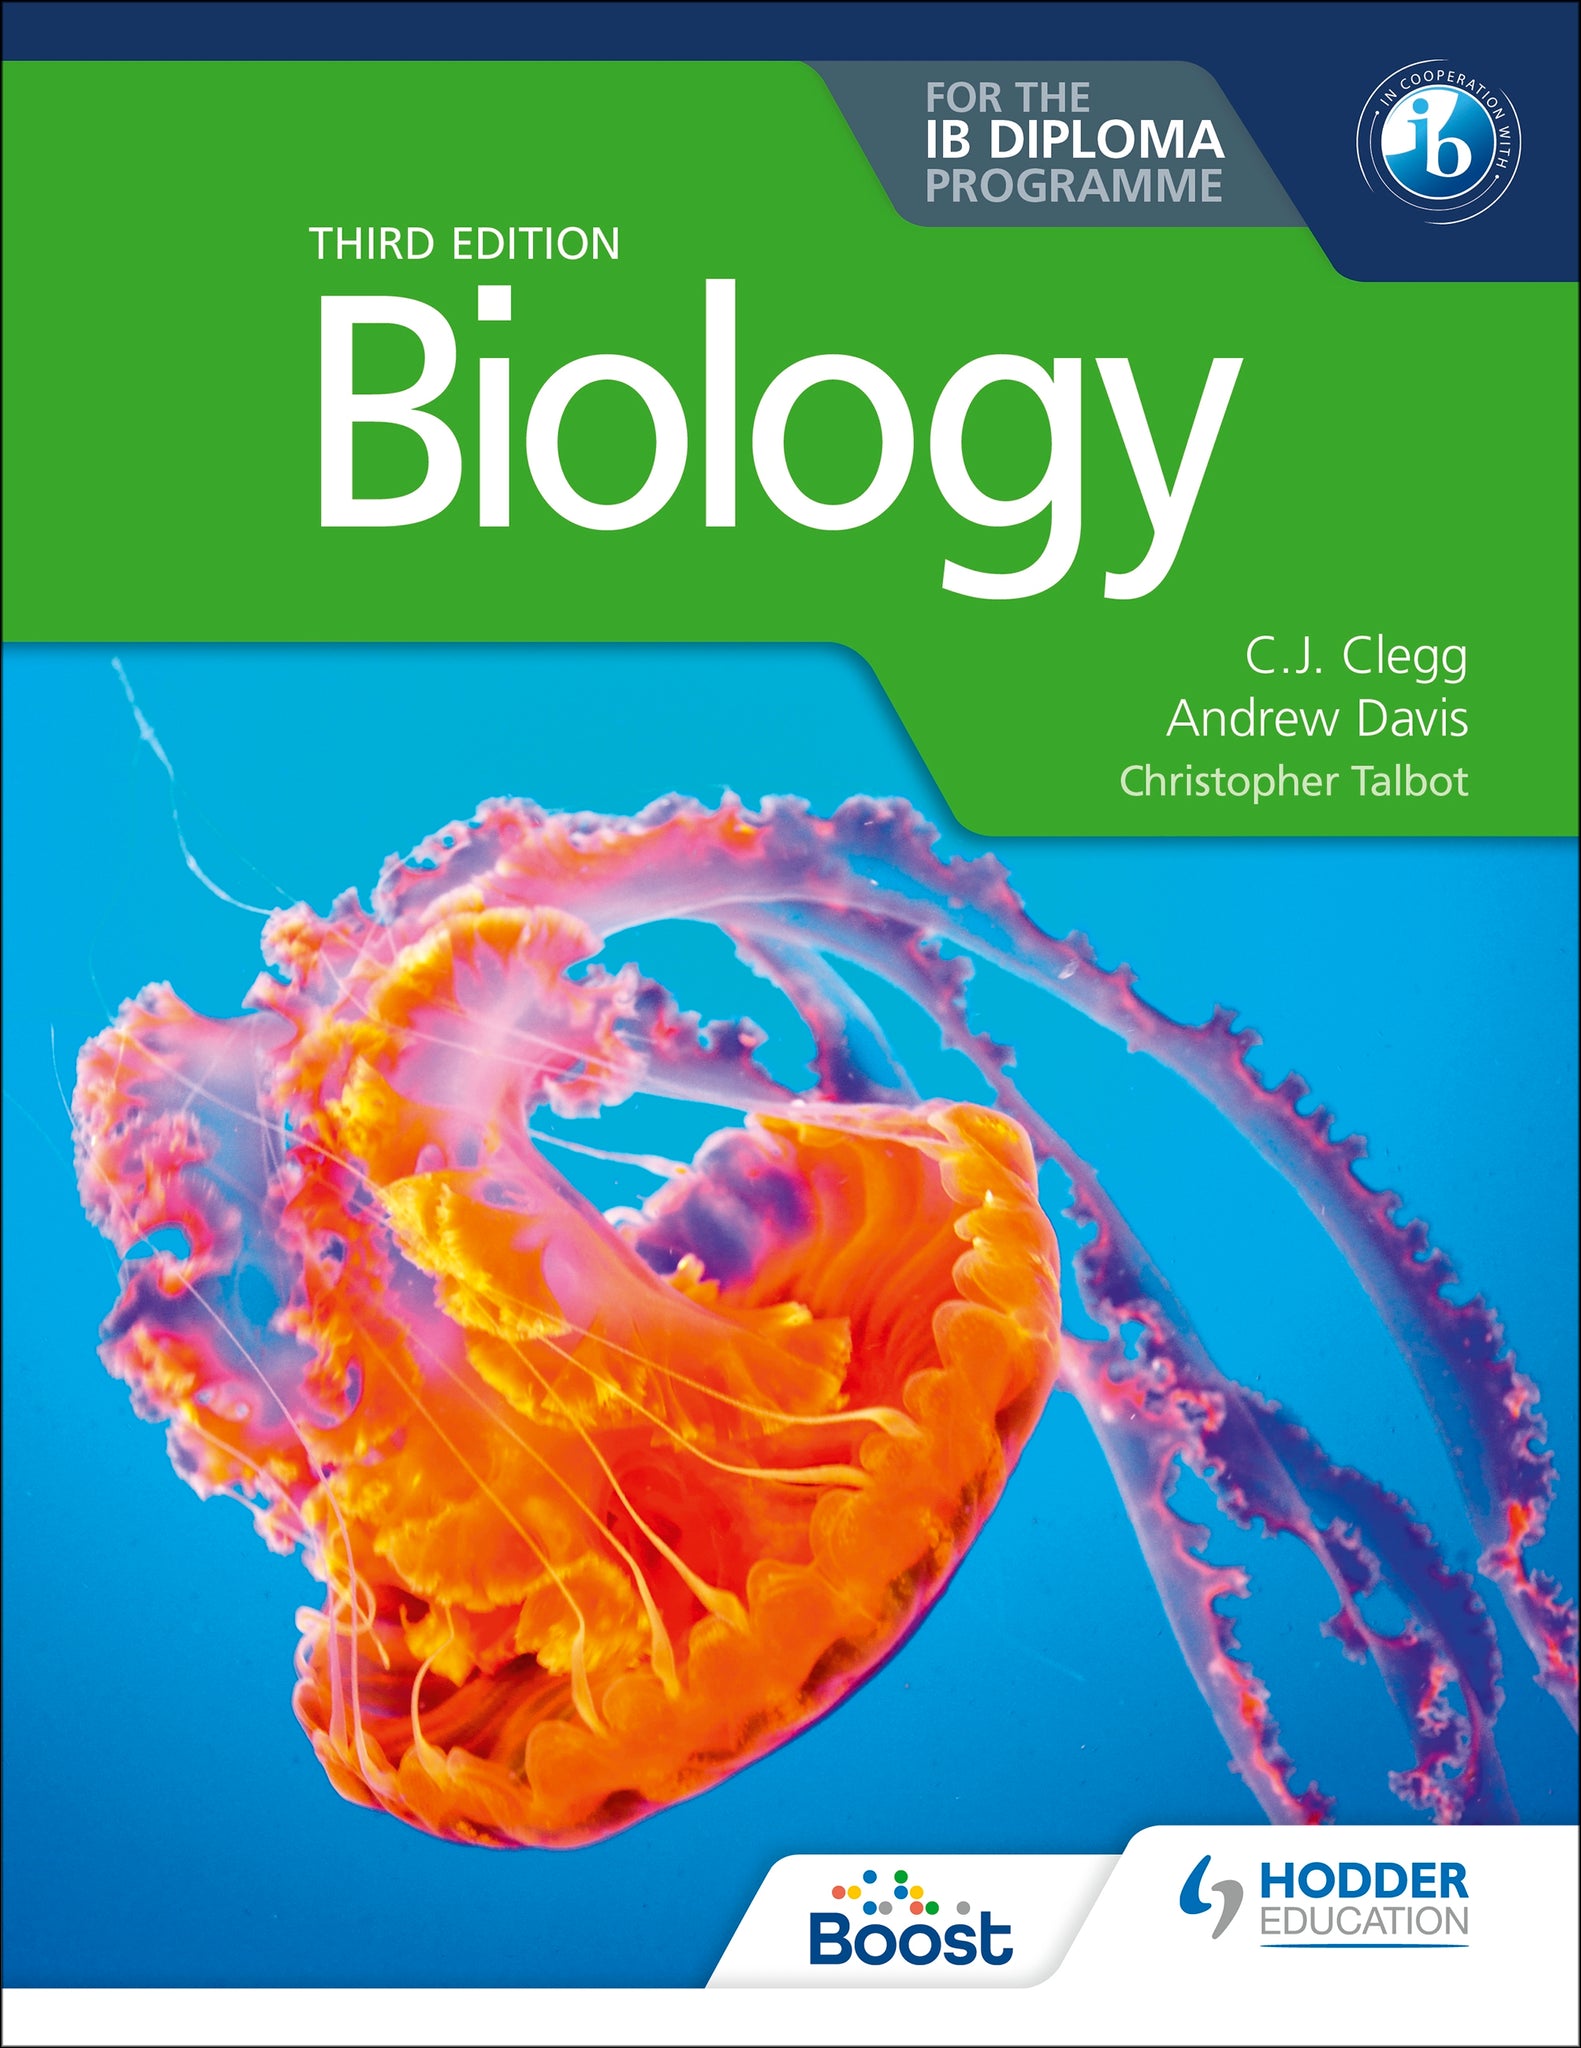 Biology for the IB Diploma Third Edition